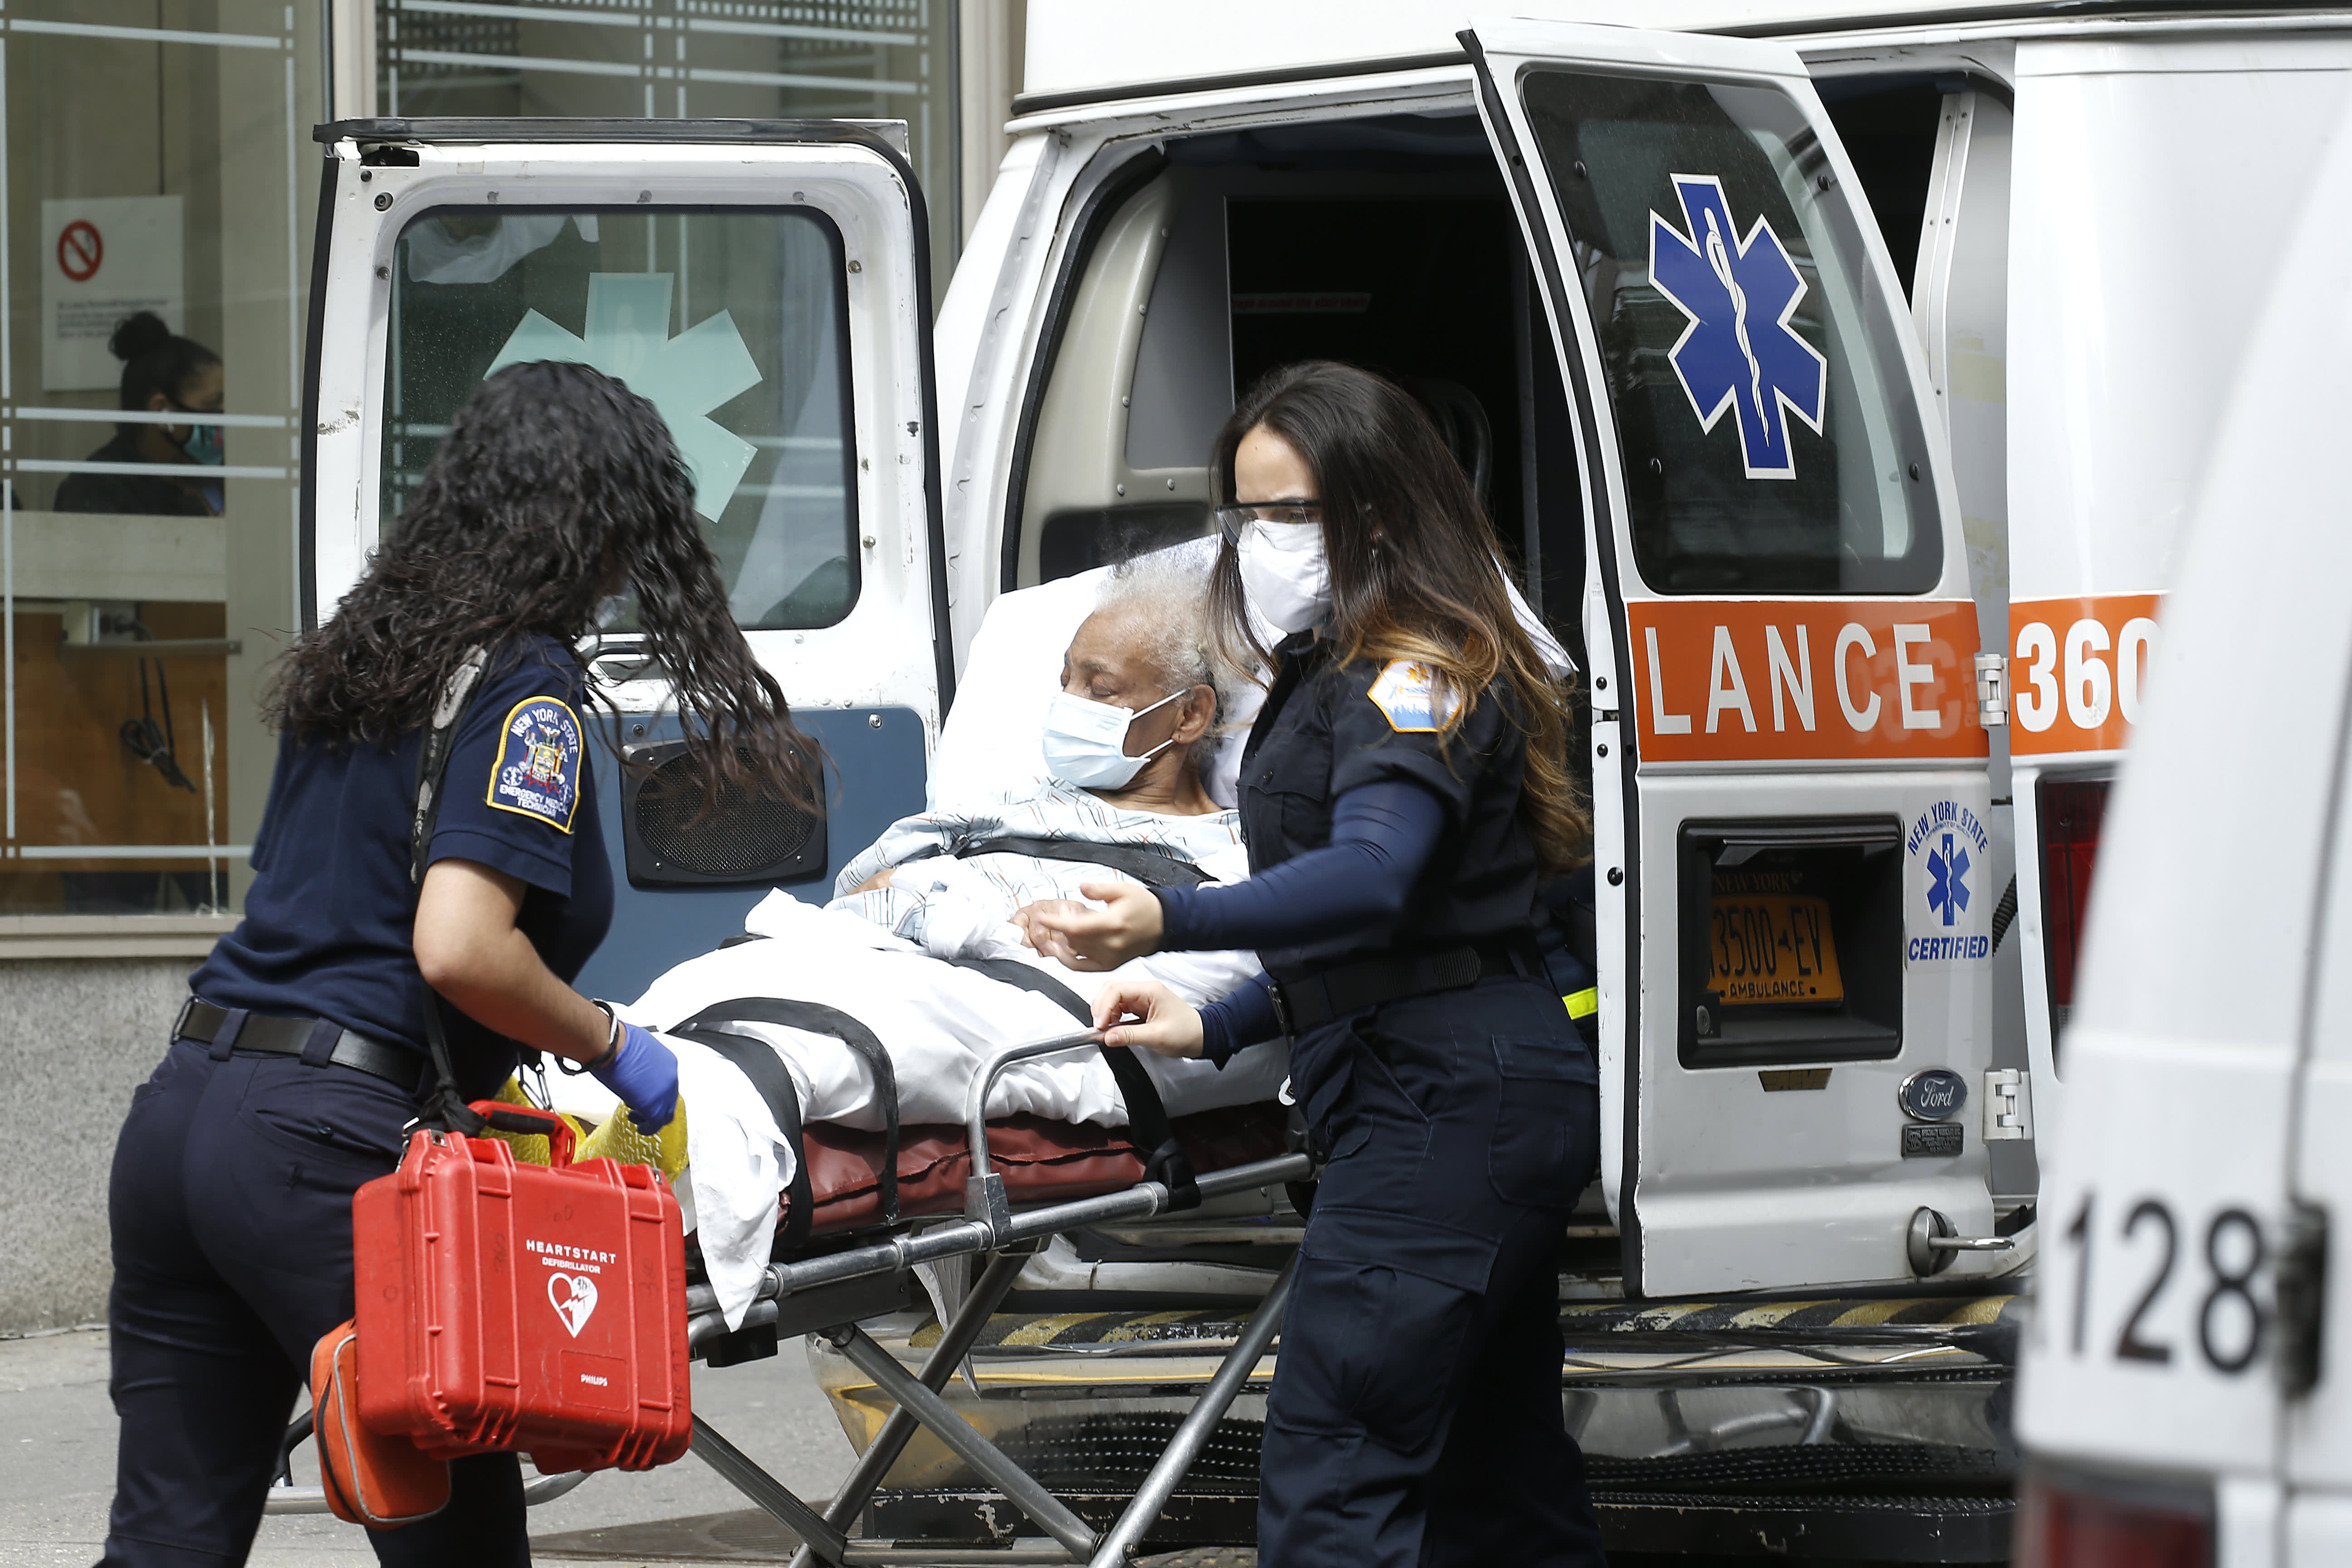 Why taking an ambulance is so expensive in the United States